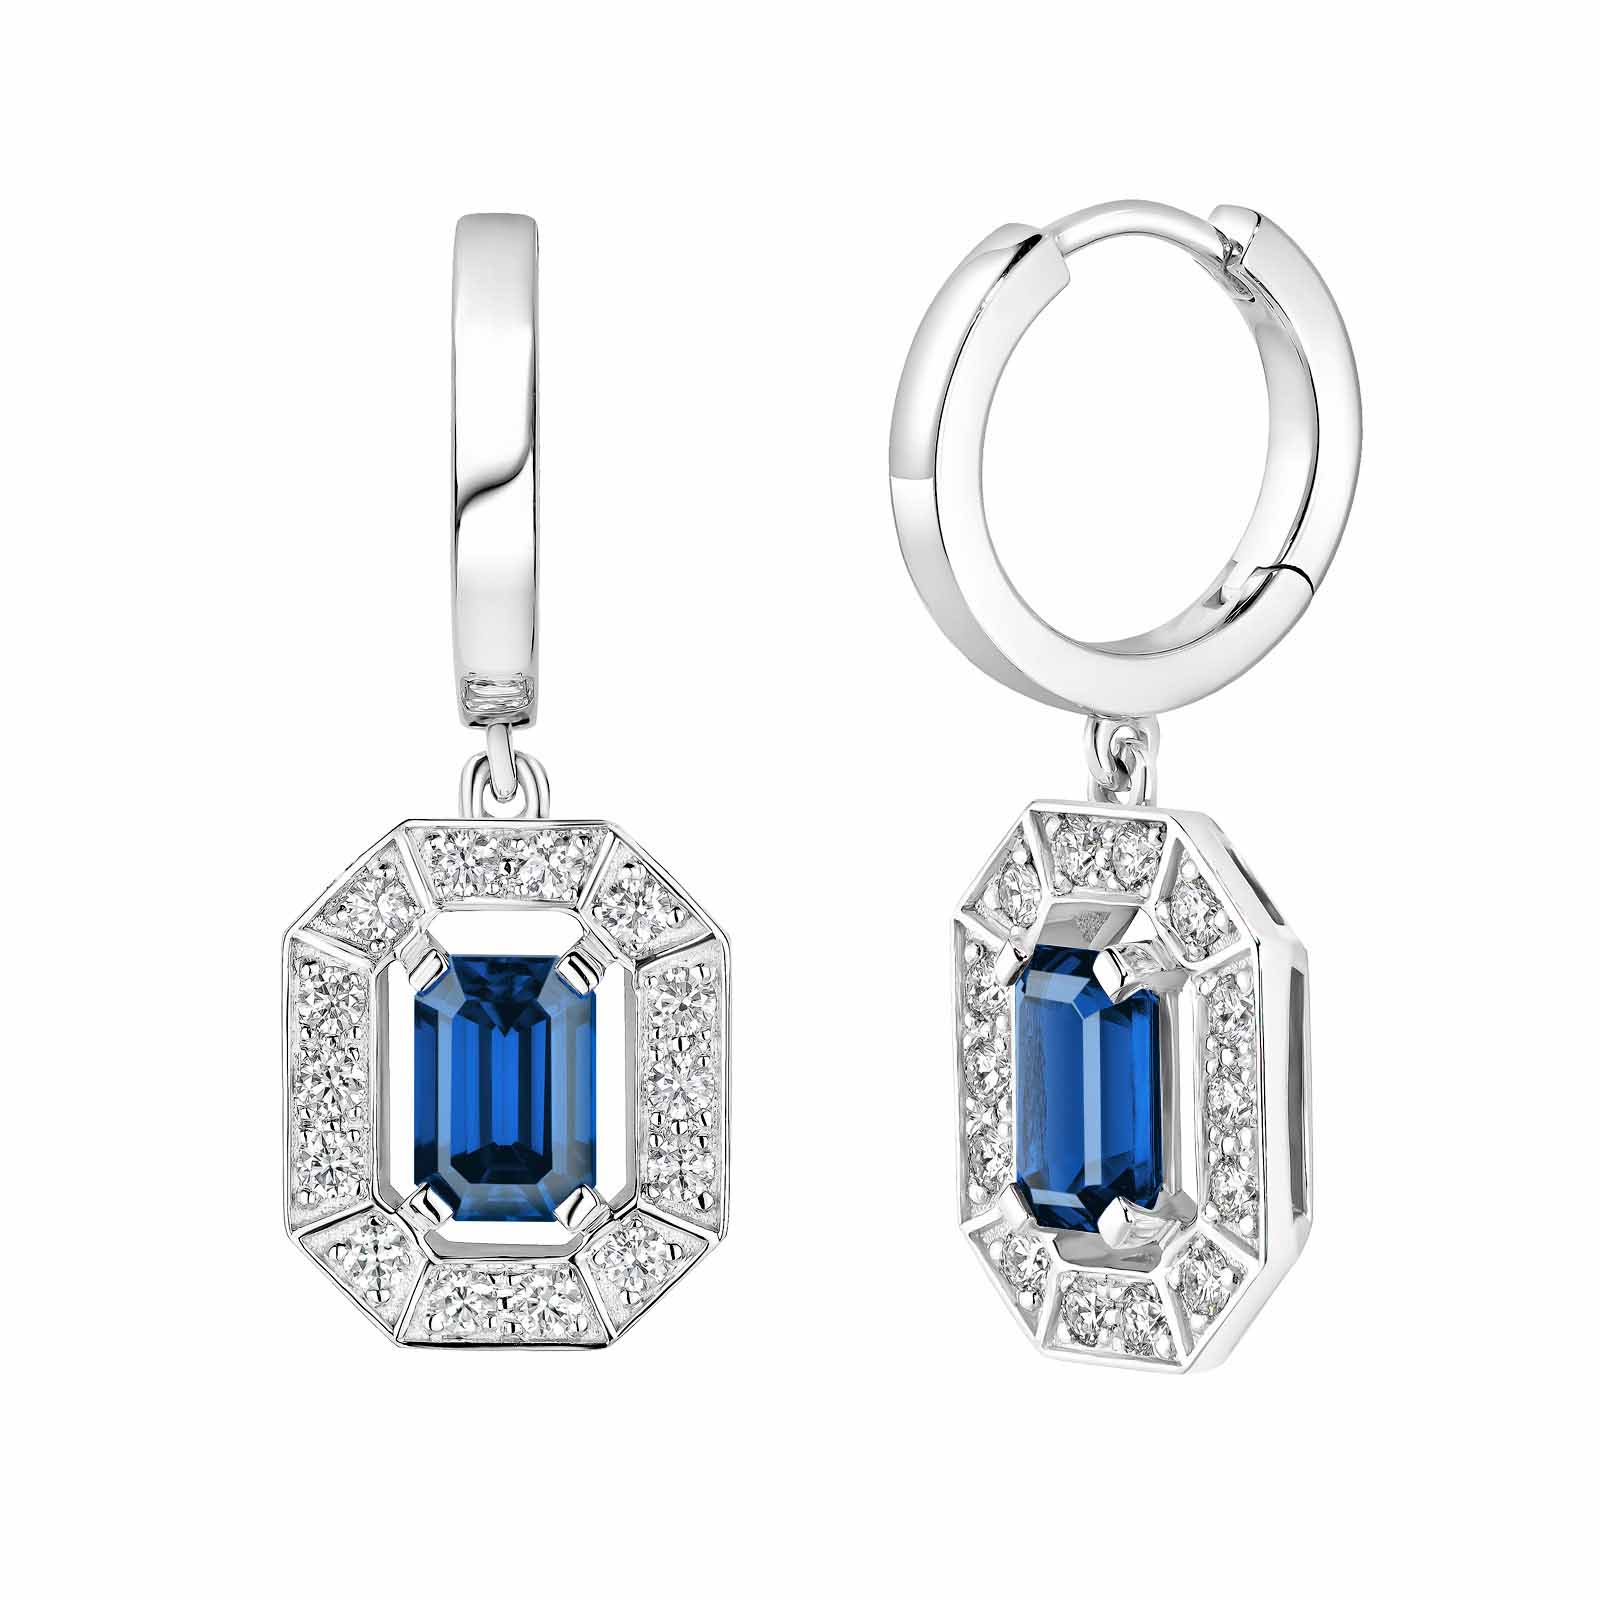 Earrings White gold Sapphire and diamonds Art Déco 1